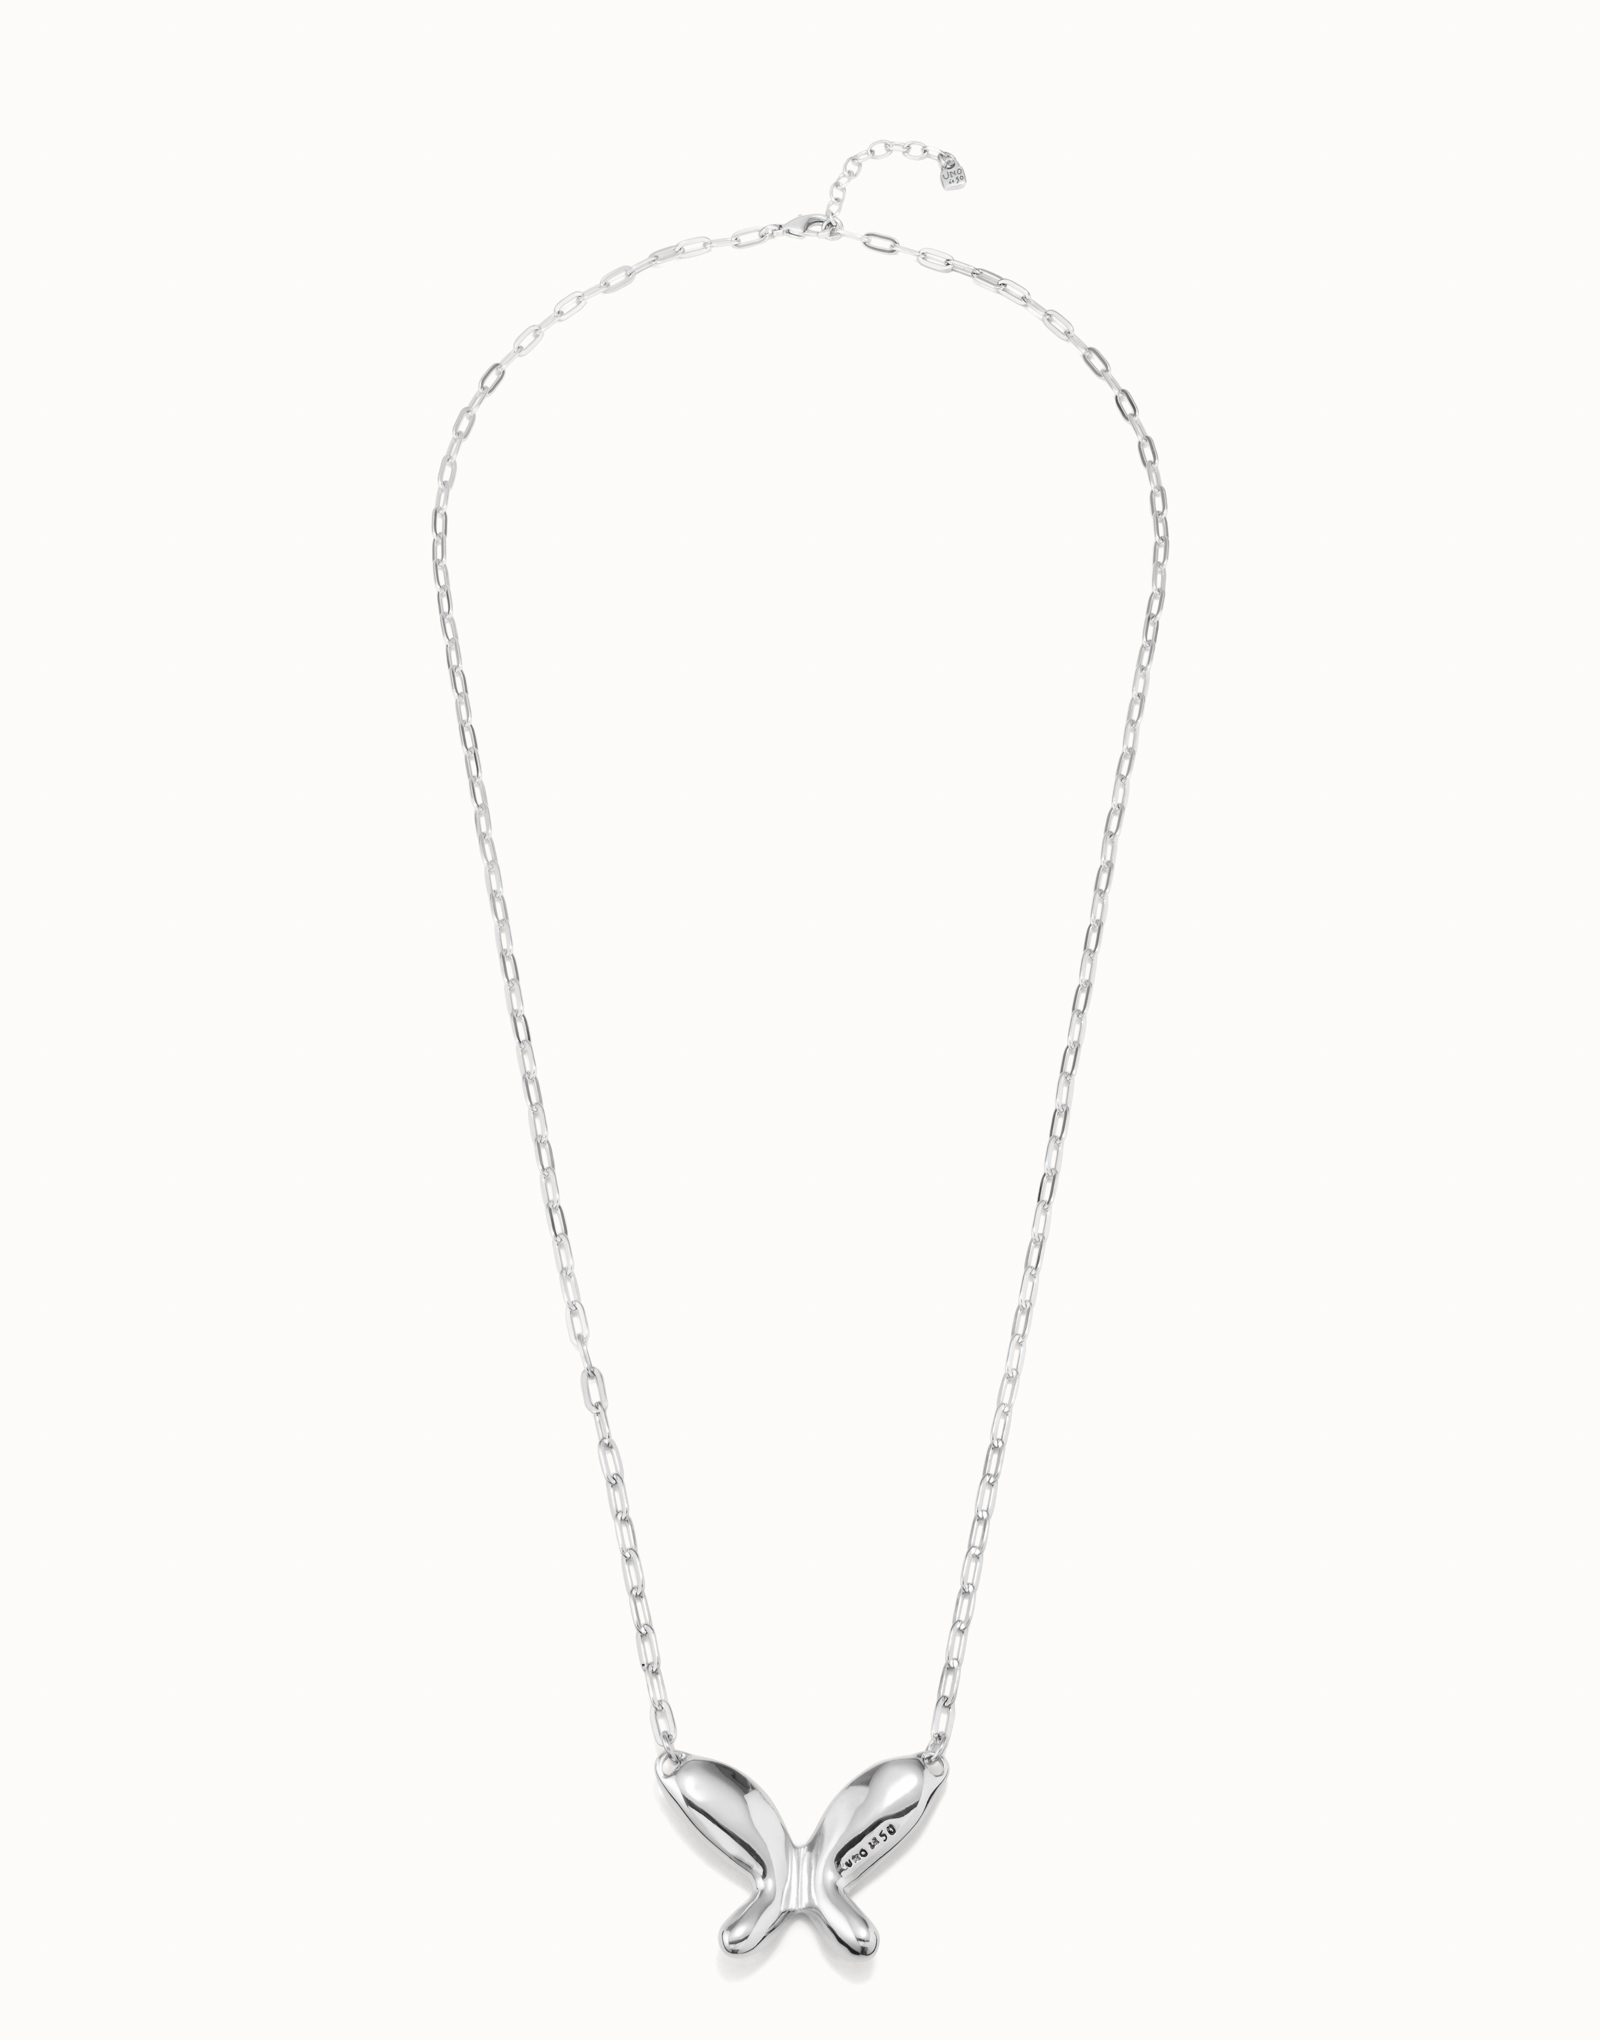 Collana lunga placcata argento Sterling con catenina a maglie, Argent, large image number null